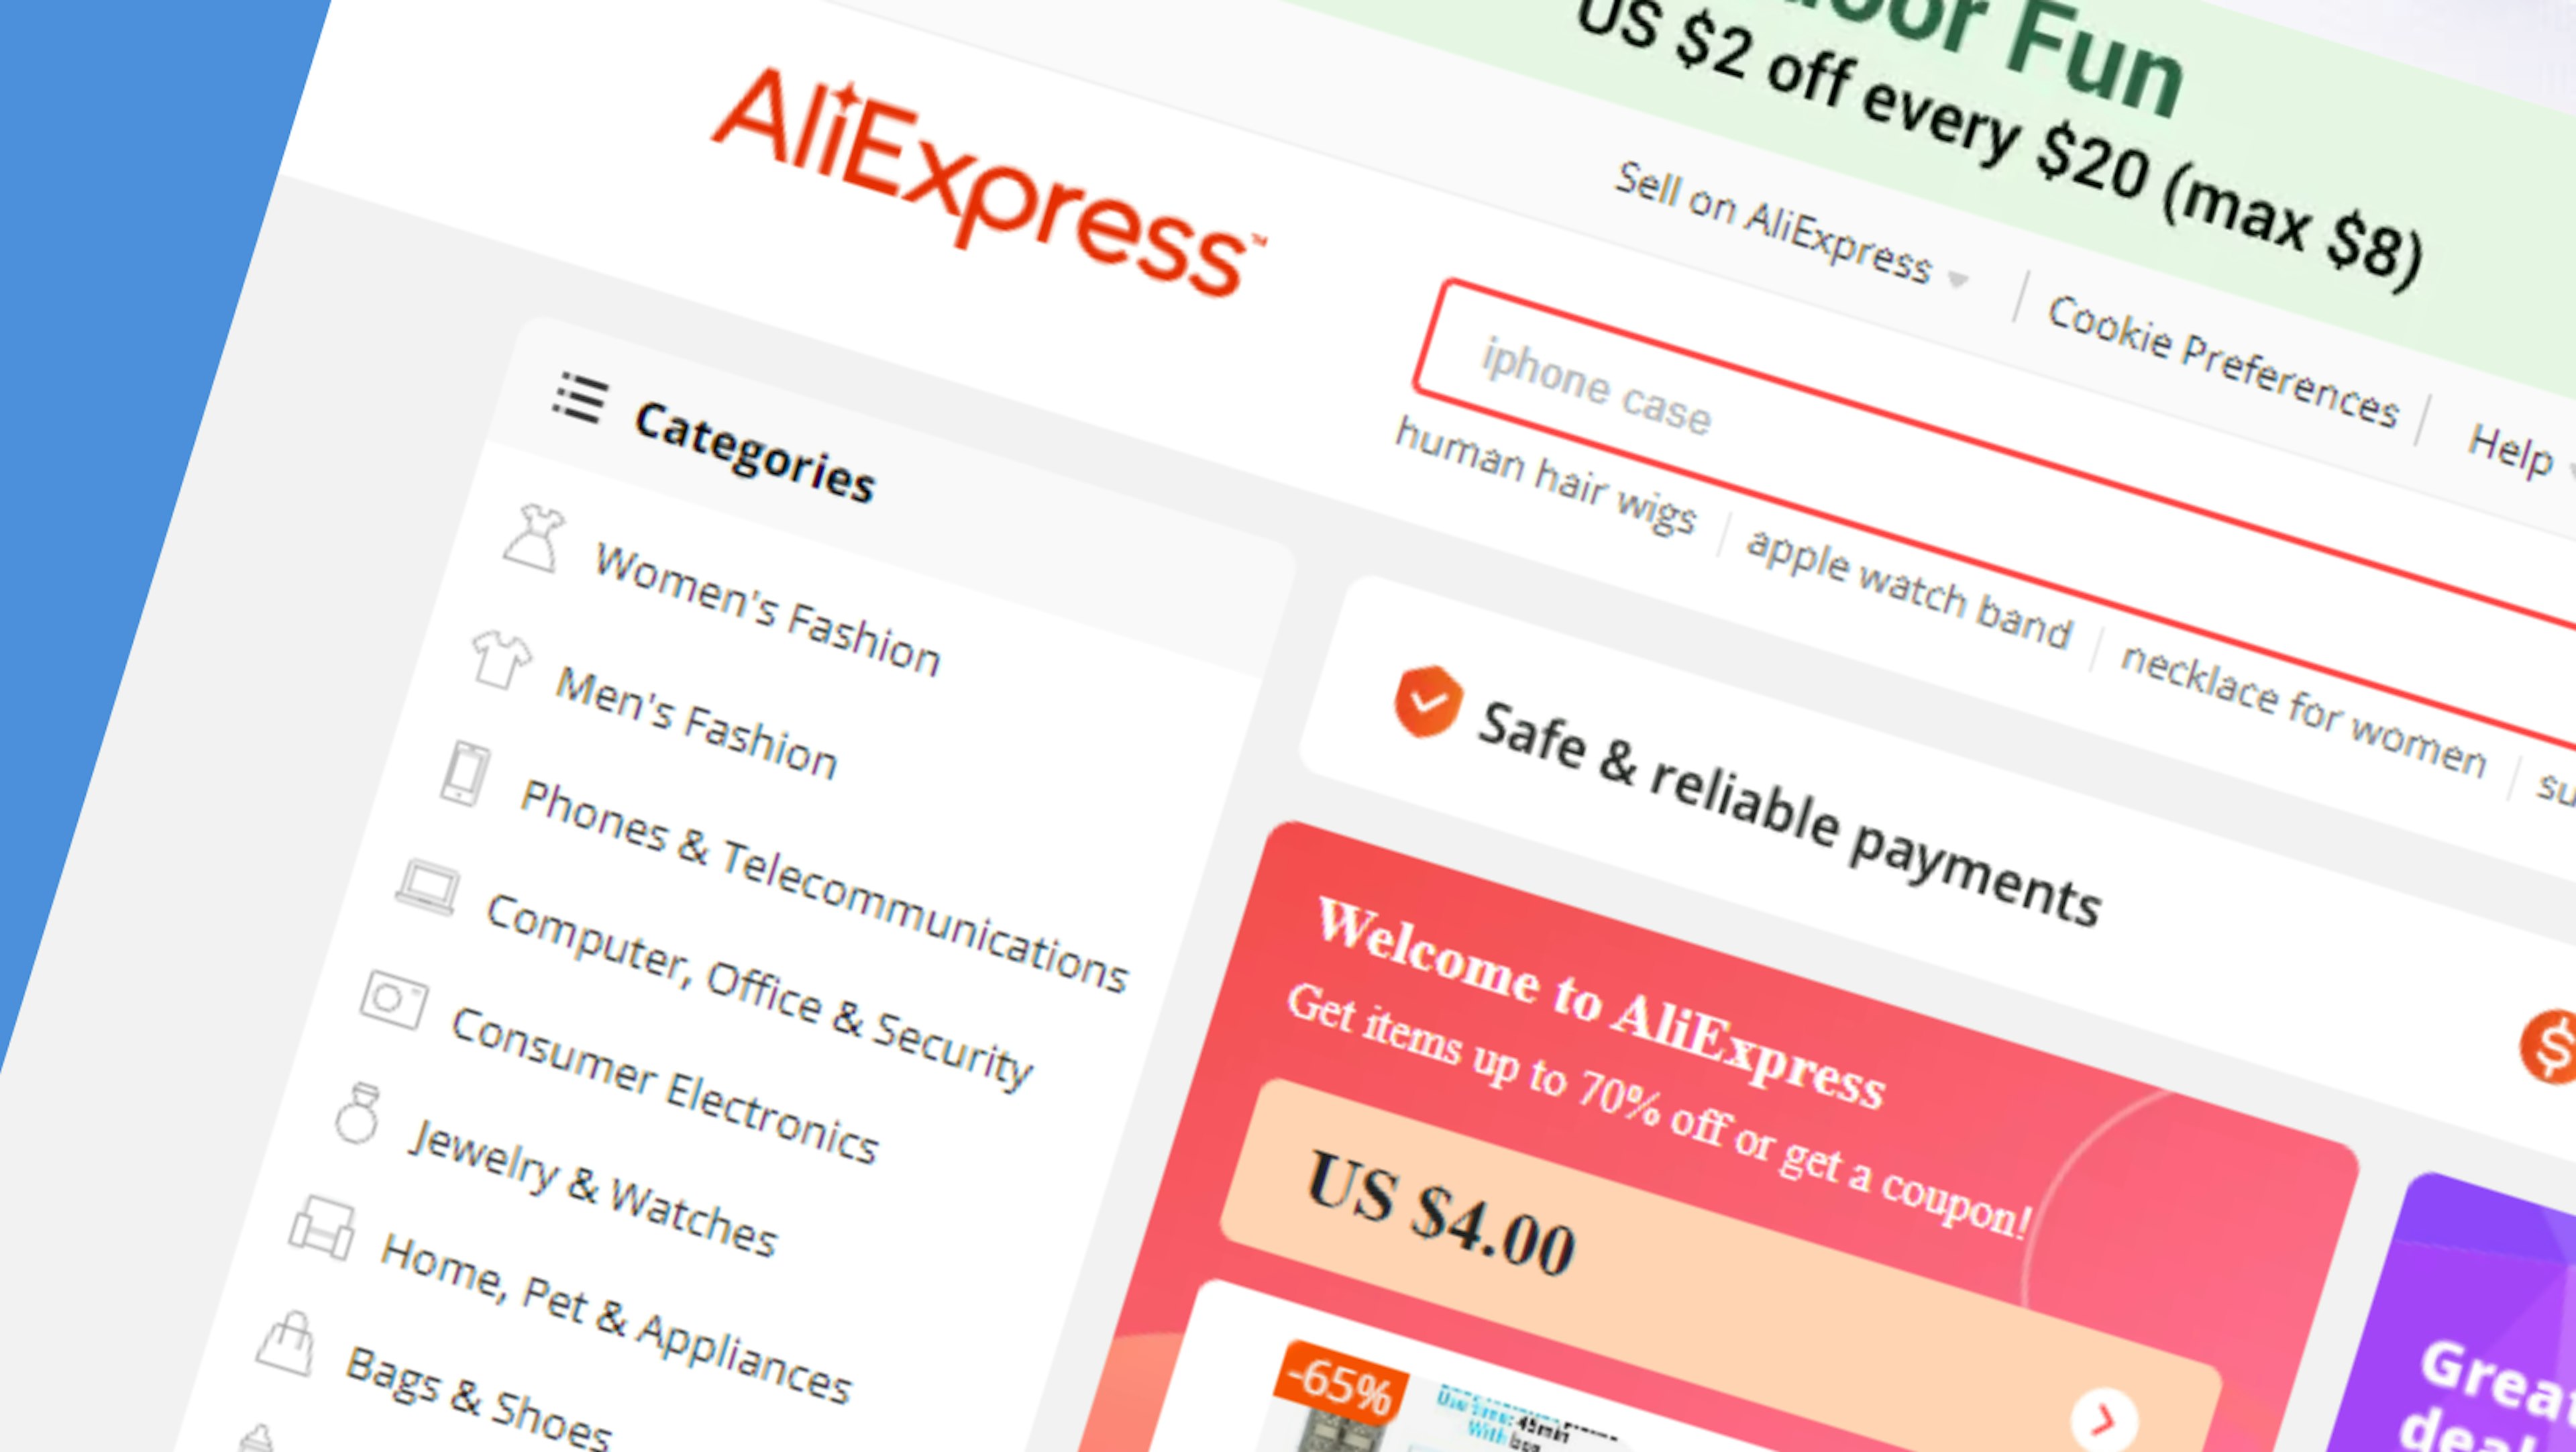 alipicks and deals - Buy alipicks and deals with free shipping on AliExpress